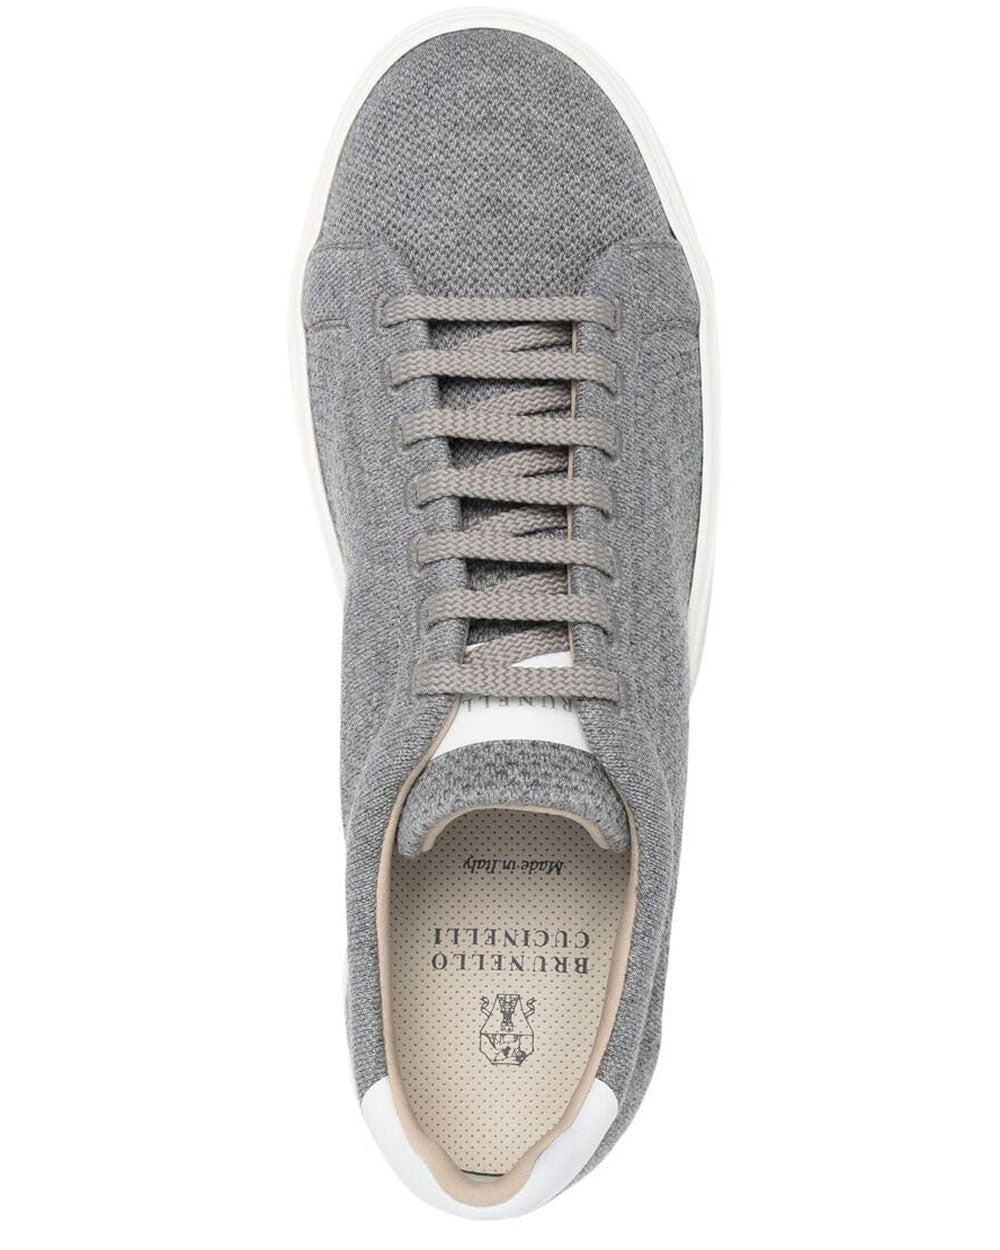 Grey Perforated Wool Knit Low Top Sneakers